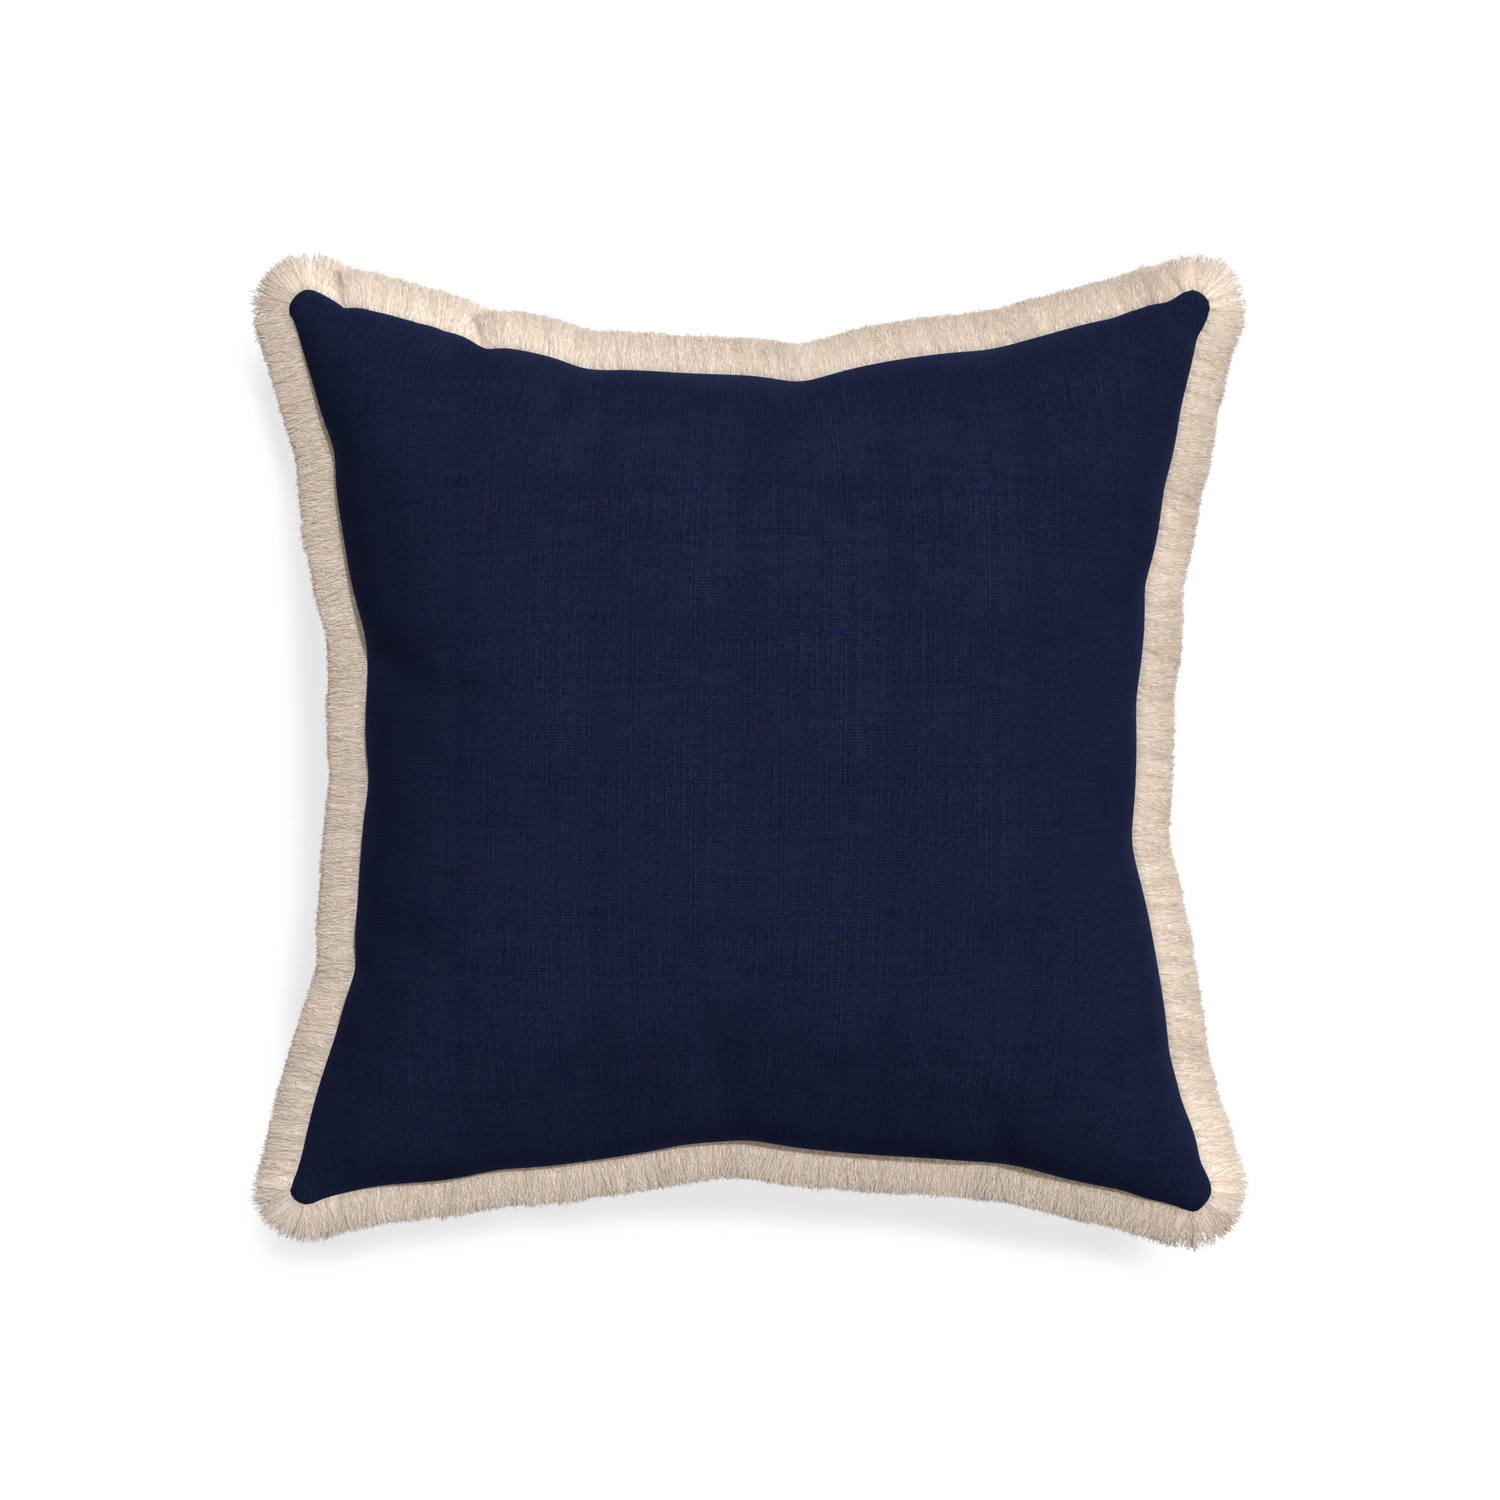 20-square midnight custom pillow with cream fringe on white background